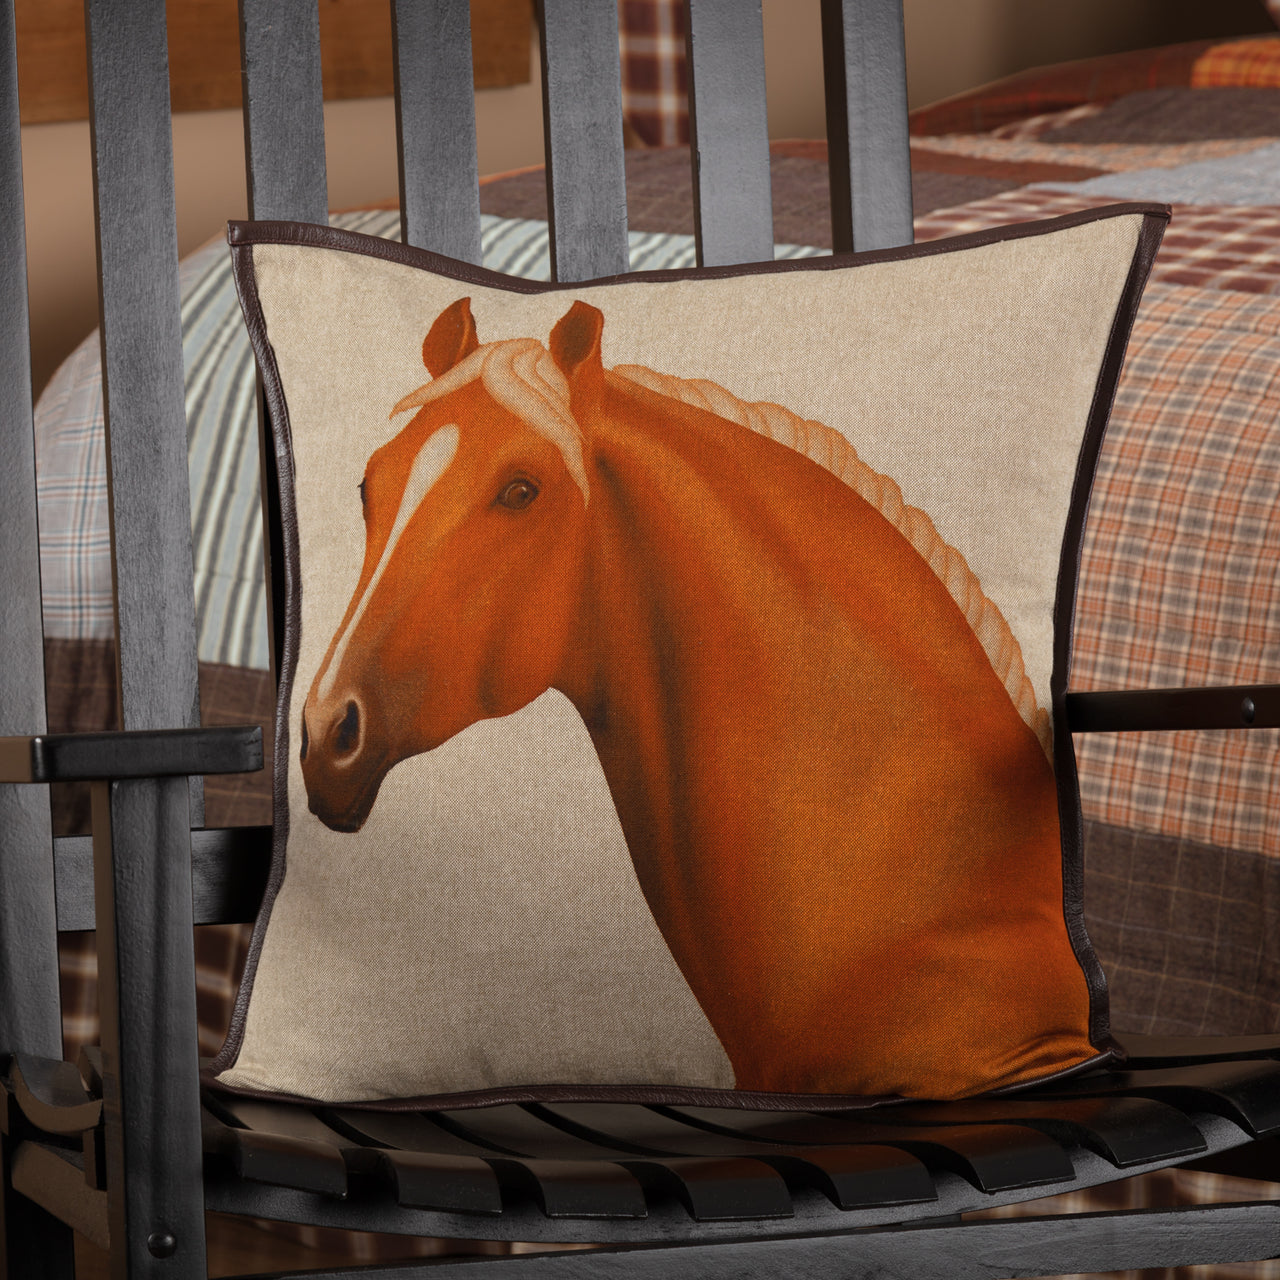 Rory Horse Pillow 18x18 VHC Brands